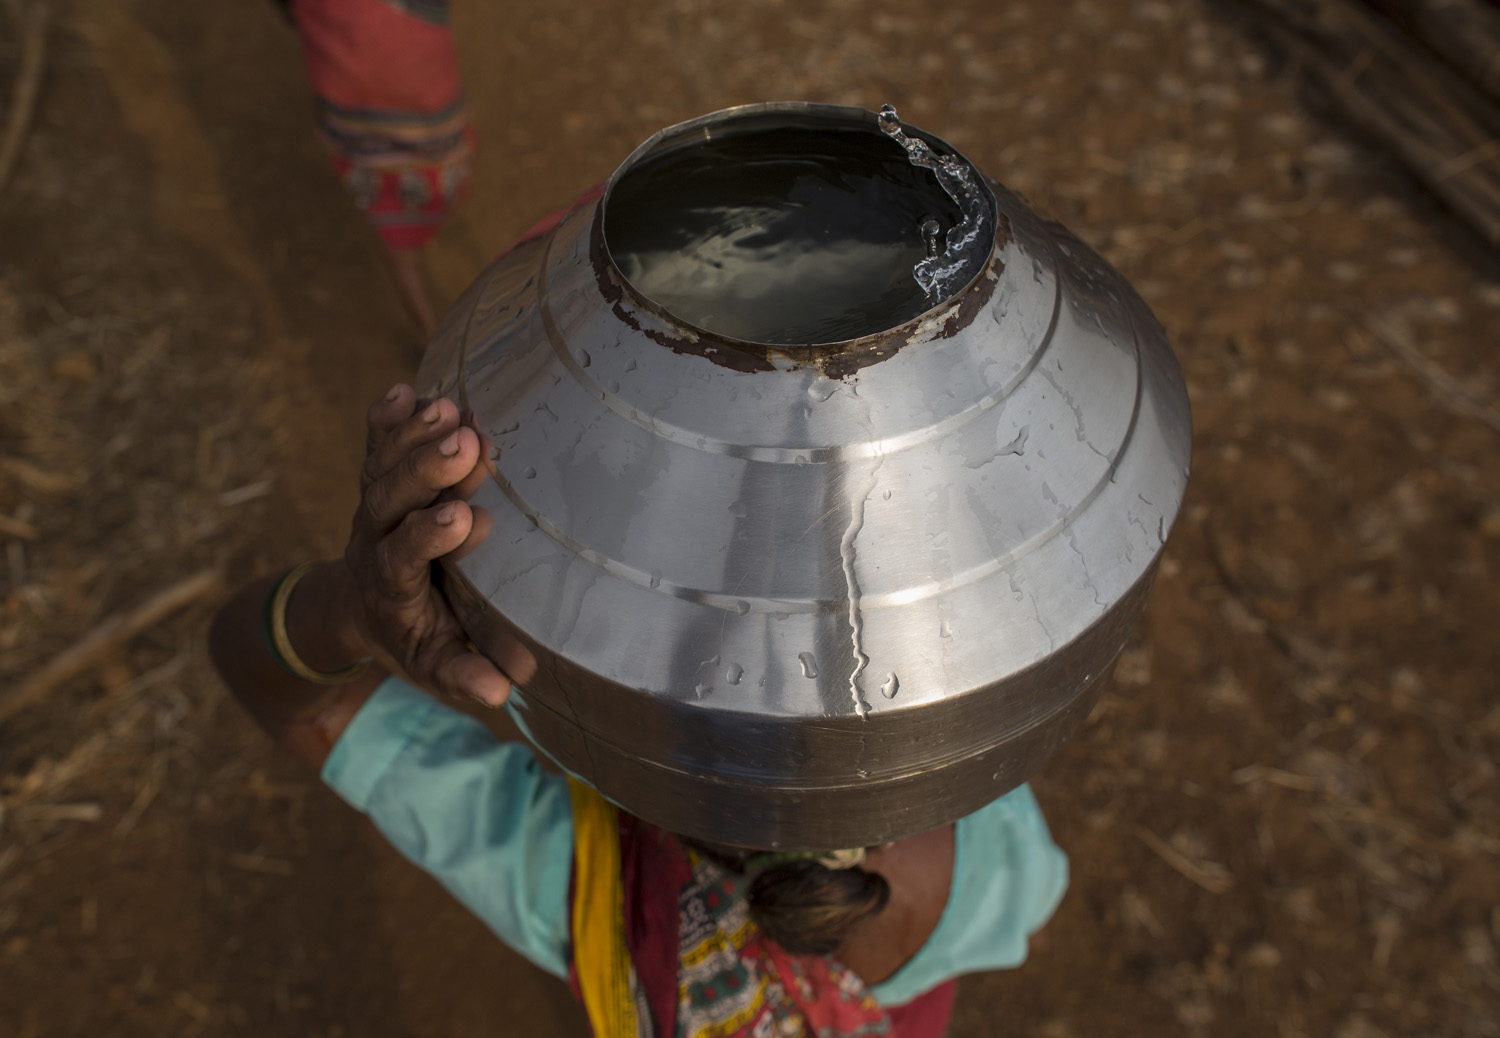  Bhaagi, third wife of Sakharam Bhagat, carries a metal pitcher filled with water from a well outside Denganmal village. 